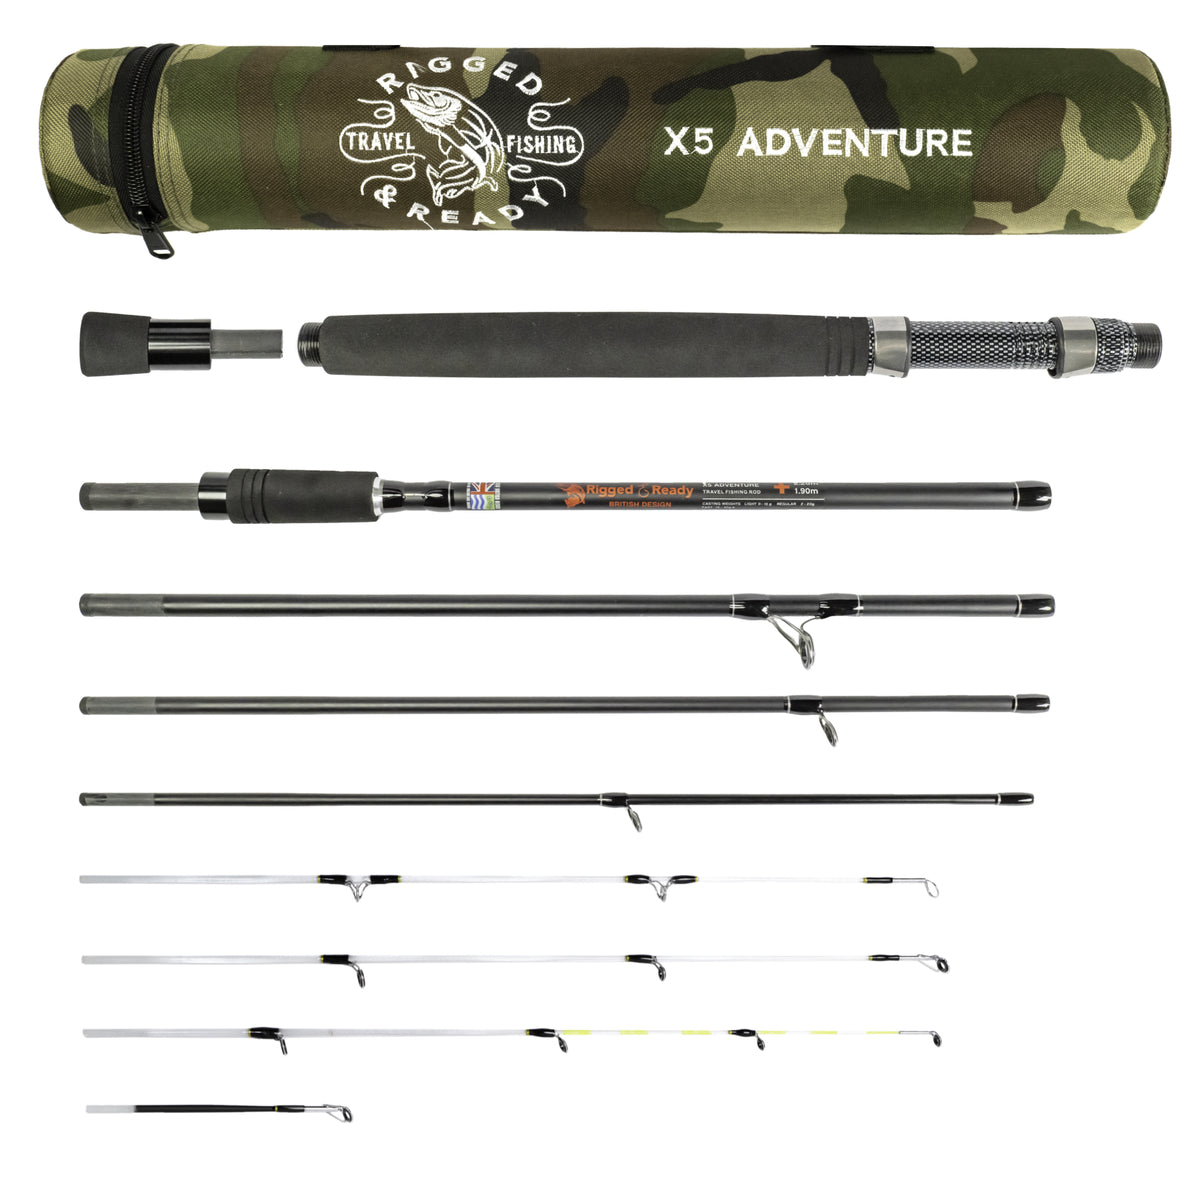 X5 Travel Fishing Rod. 5 Rods in One 220cm 7' 2 190cm 6' 3 Spin, Cast